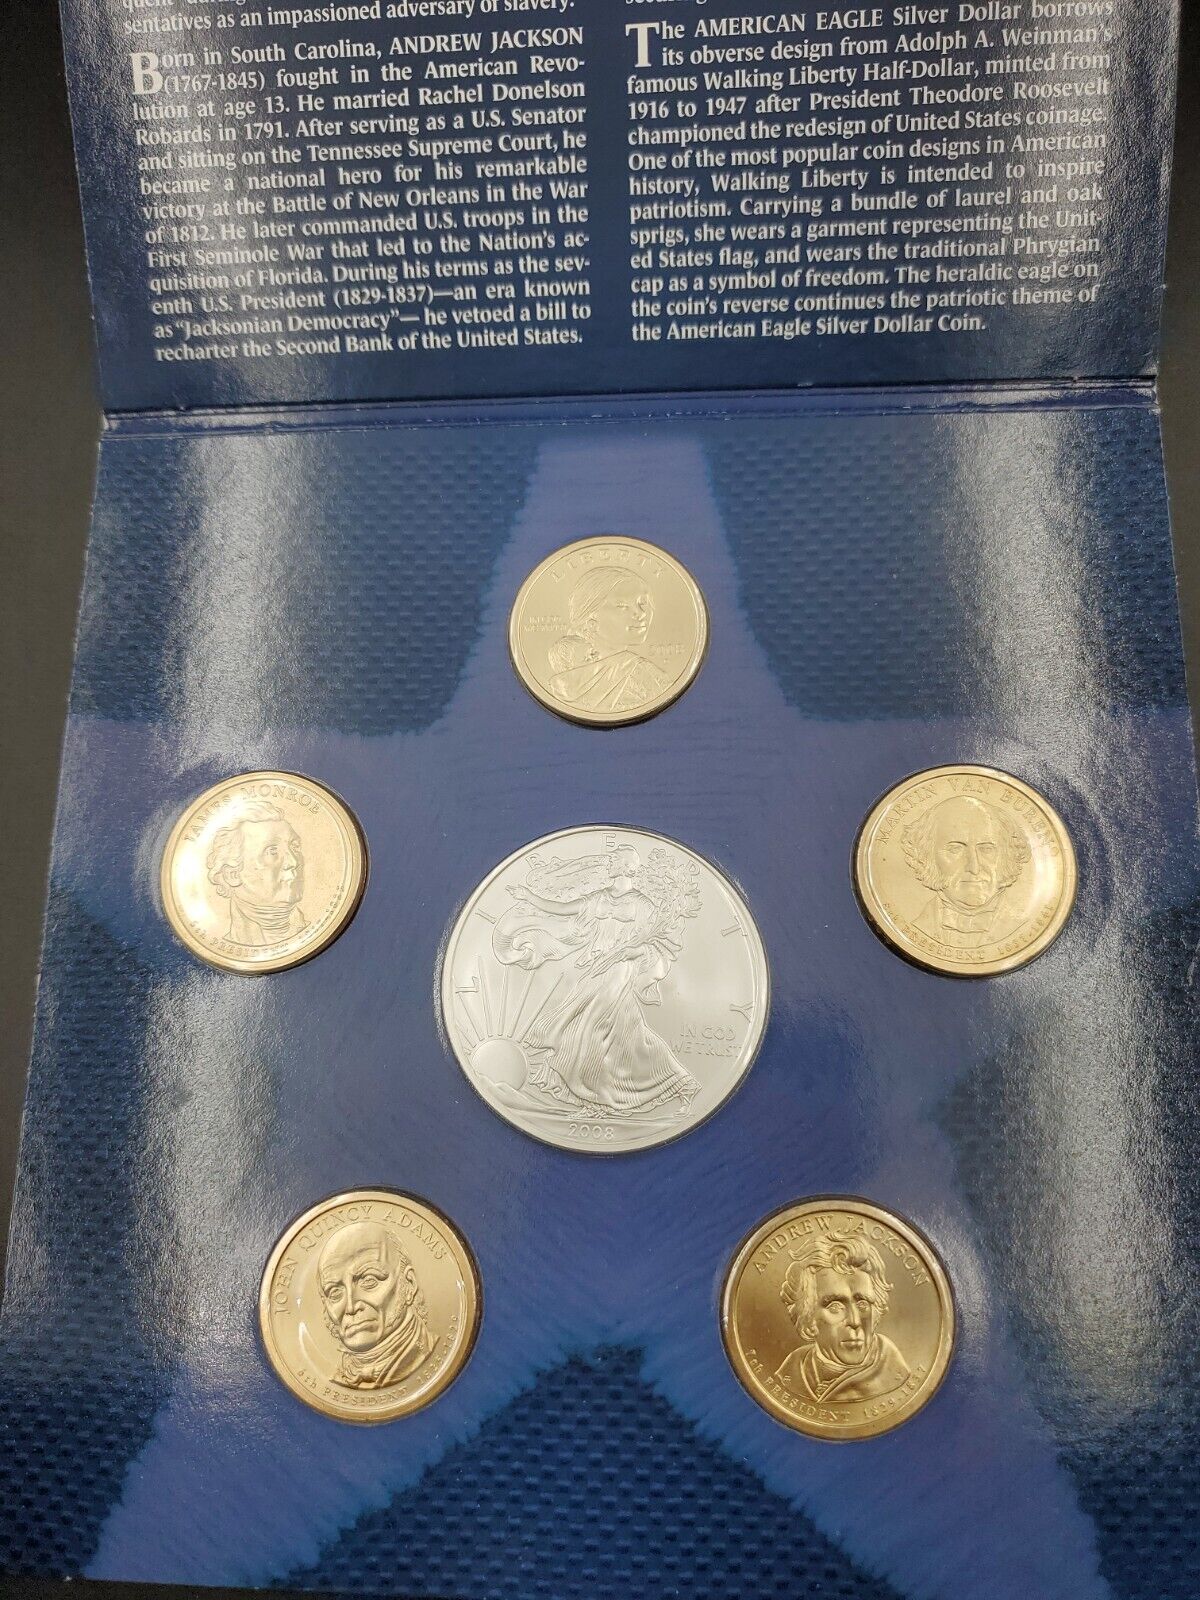 2008 Annual United States Uncirculated Dollar Coin Set w/ silver eagle